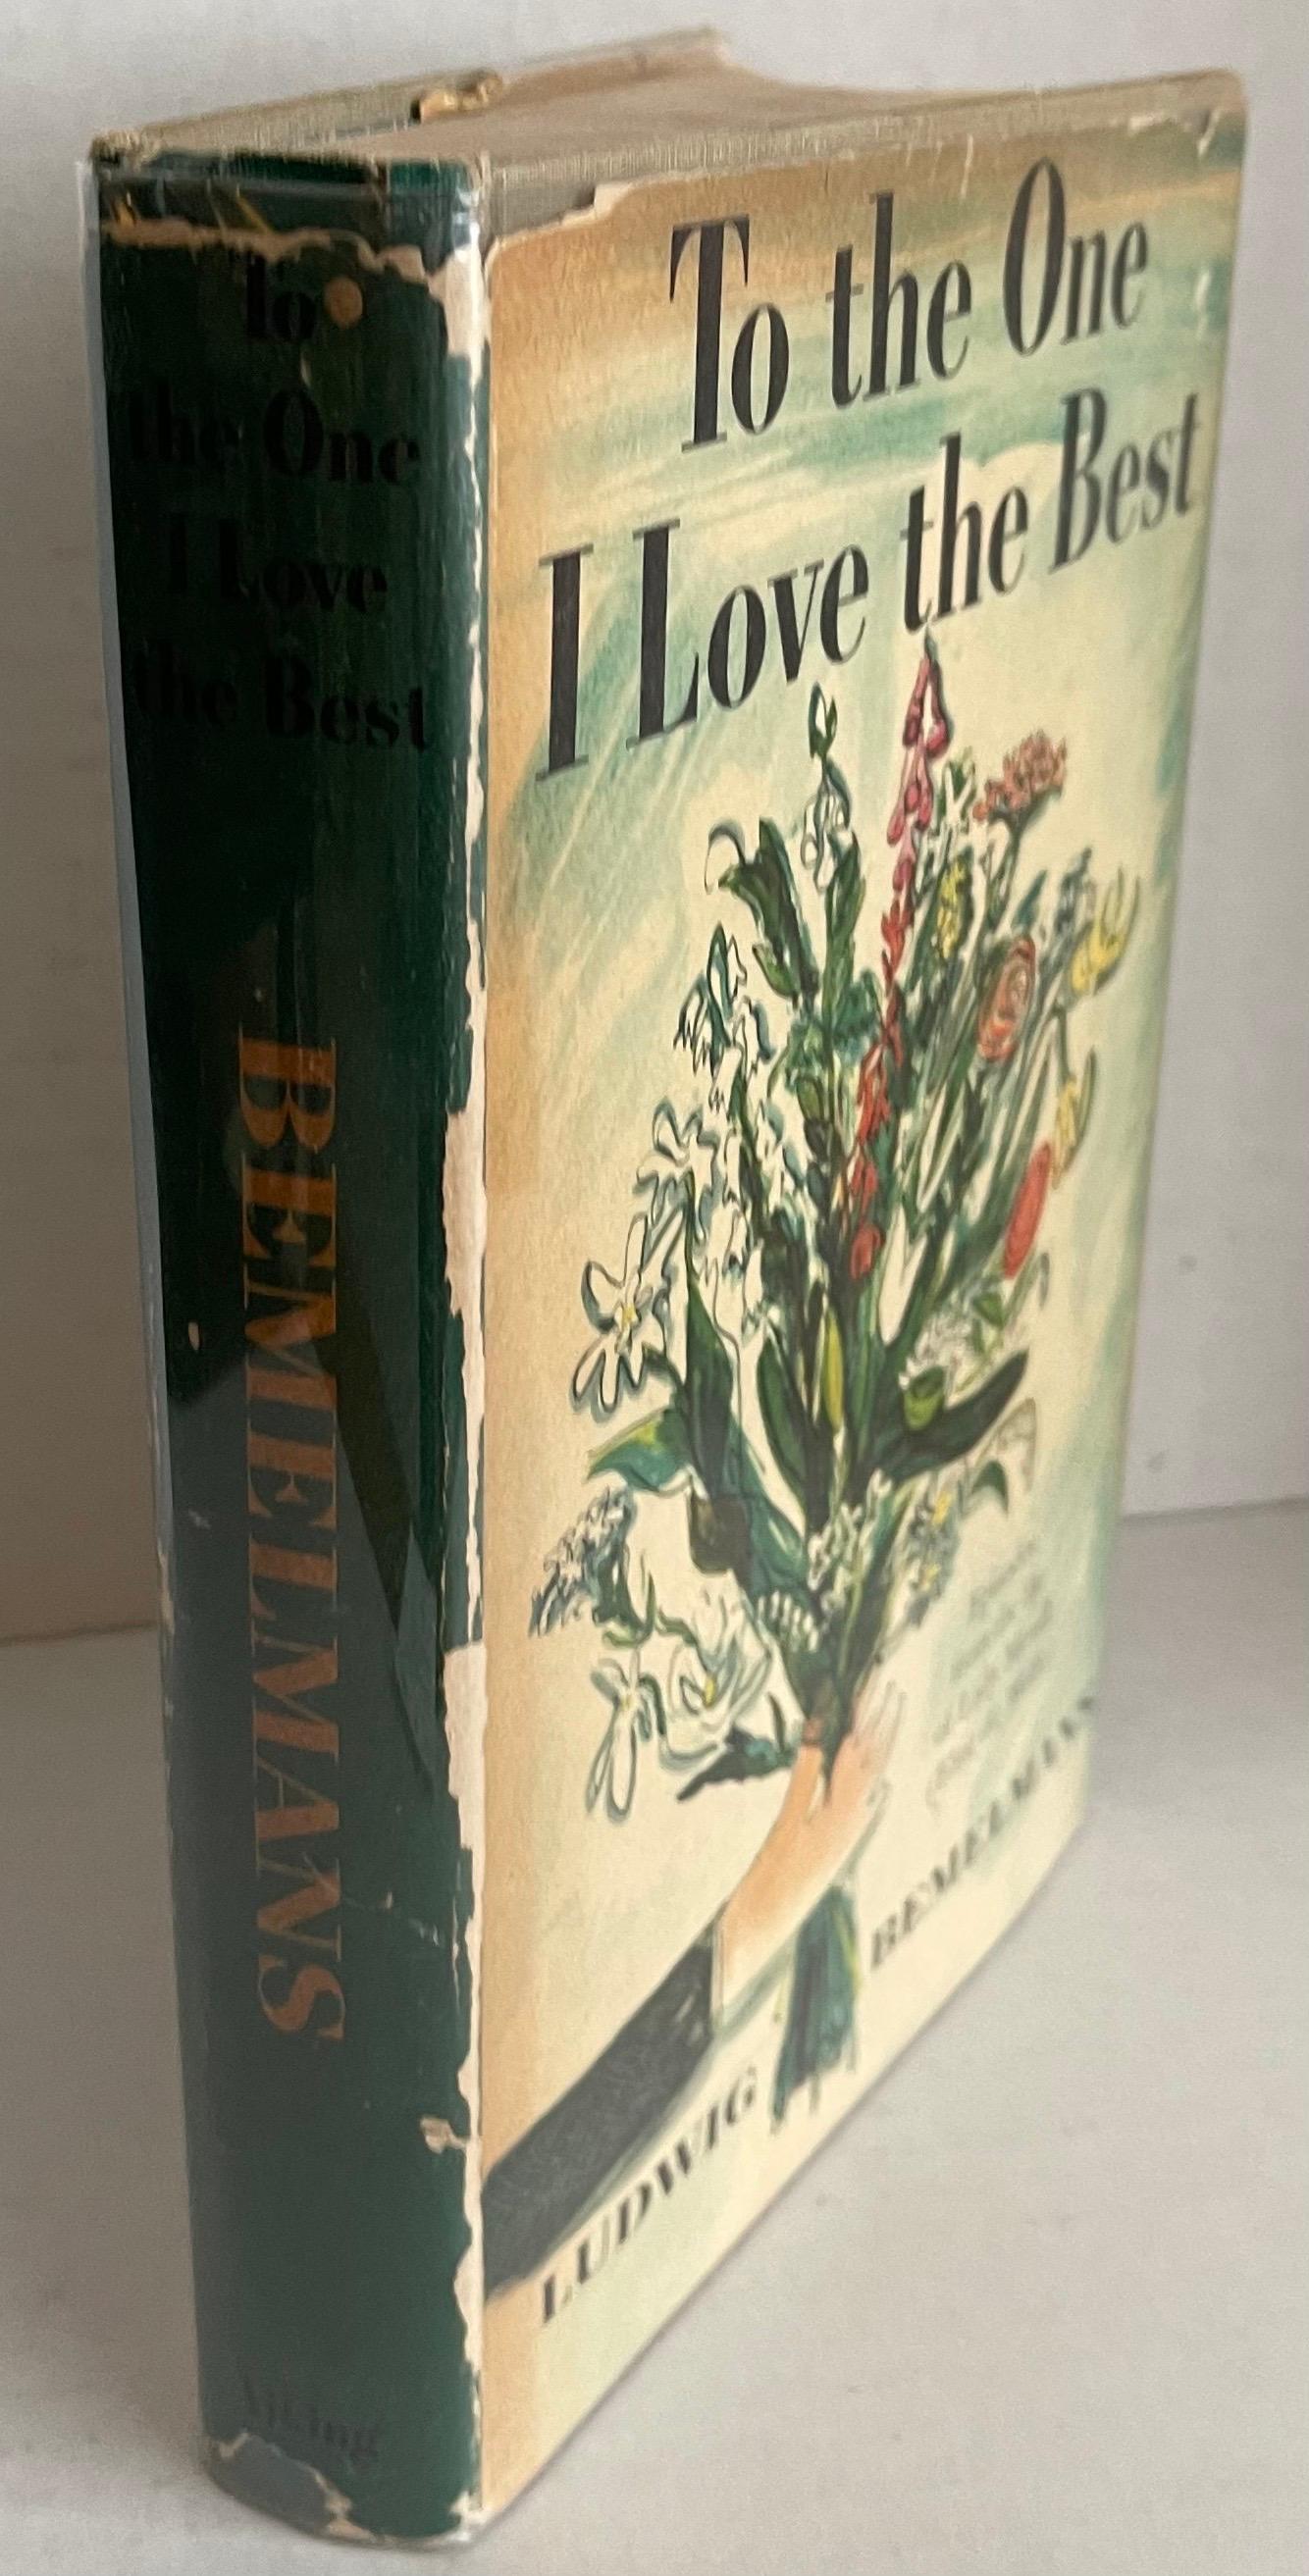 Hollywood Regency To the One I Love the Best 1955 by Ludwig Bemelmans For Sale